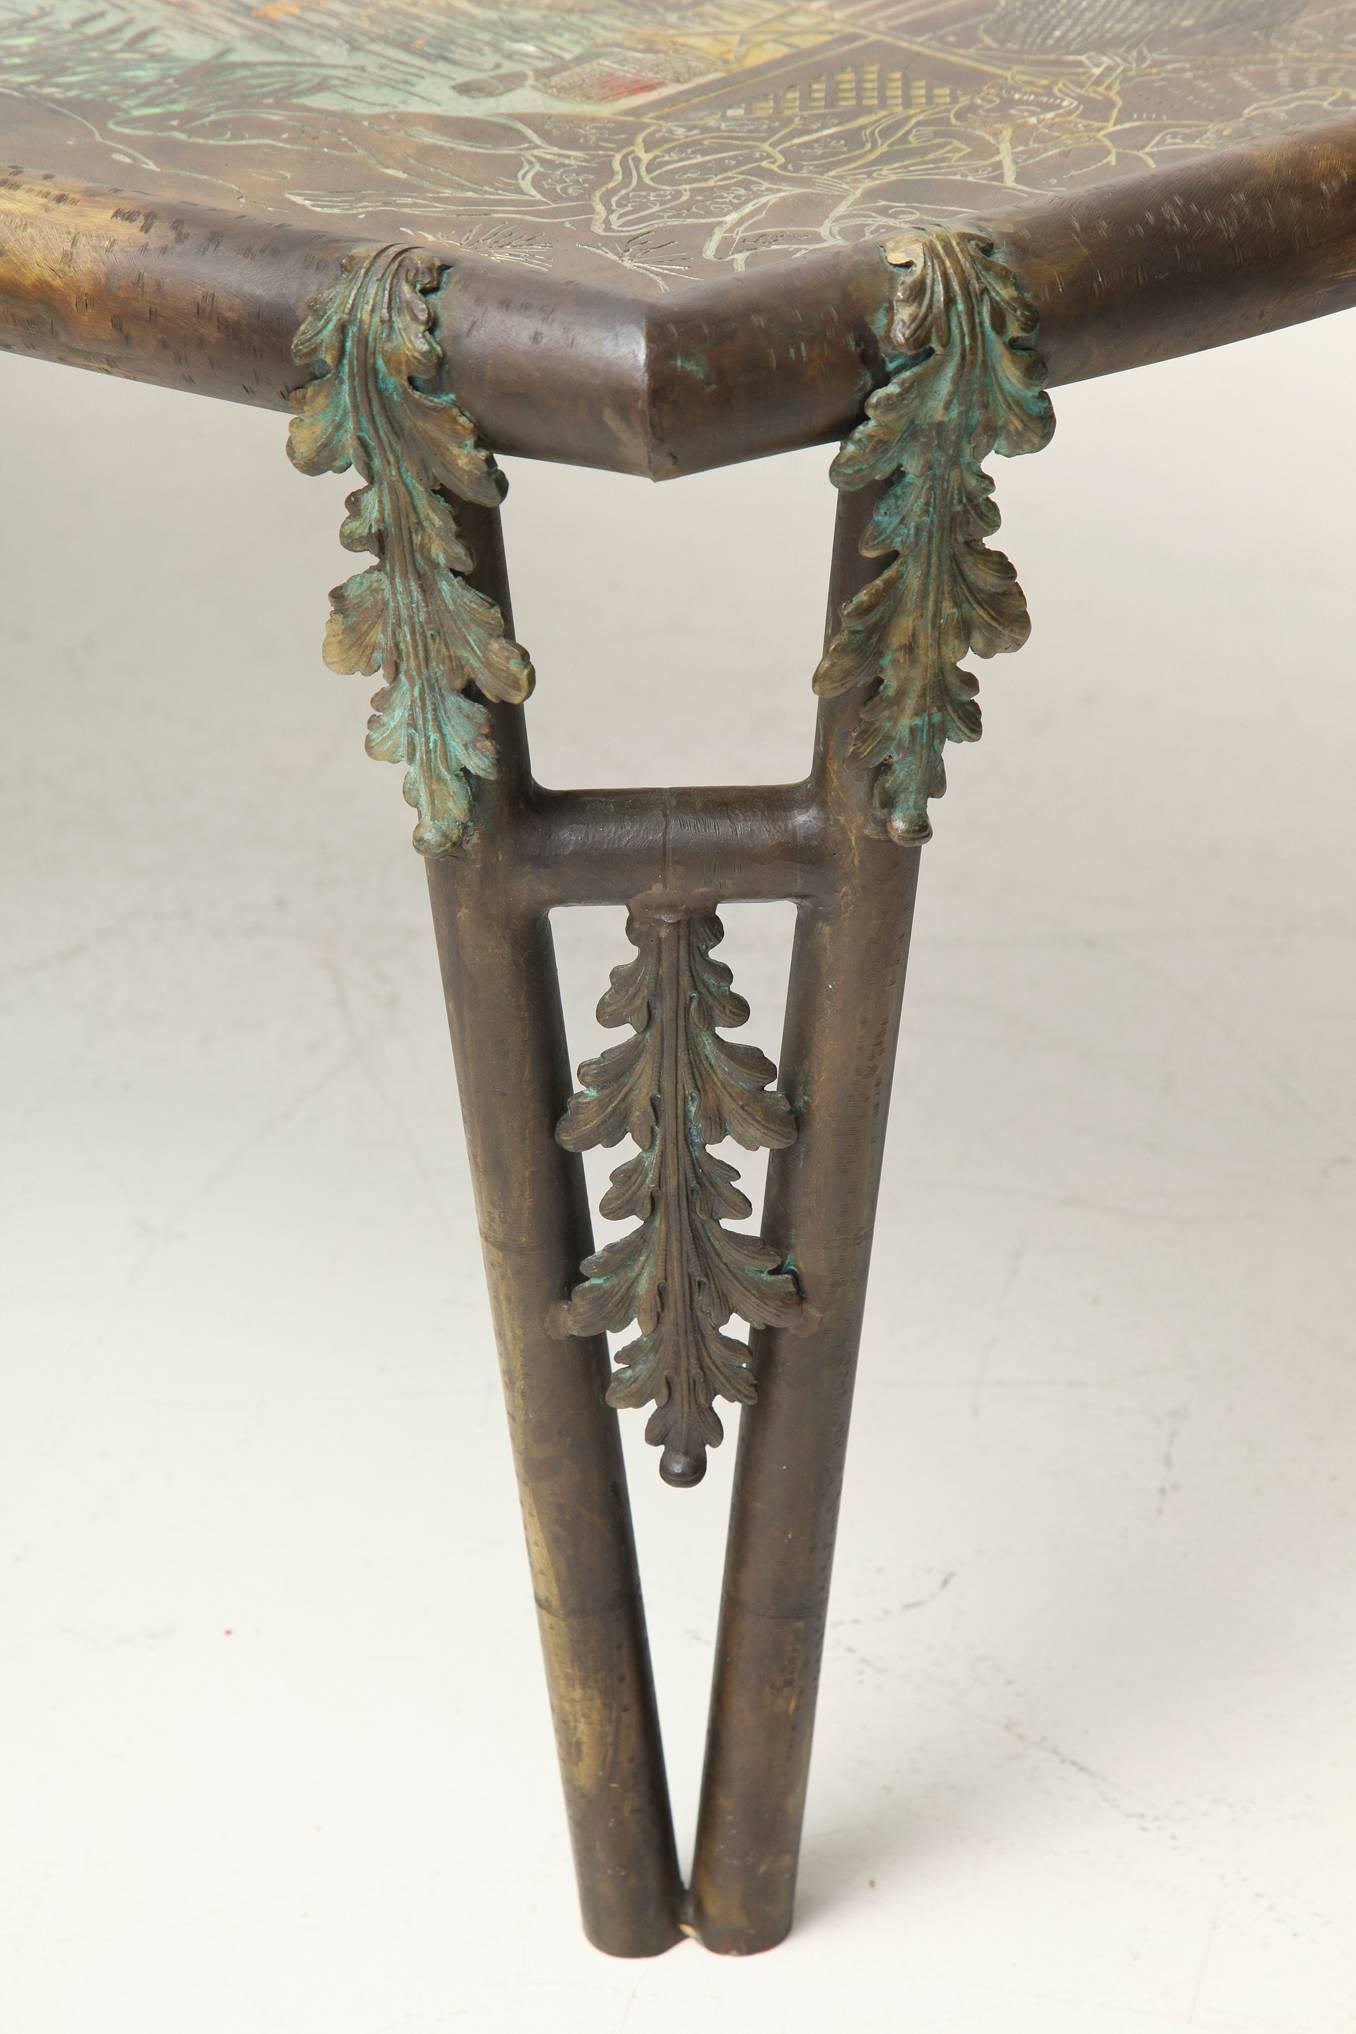 Philip (1908-1988) and Kelvin (b. 1936) LaVerne
Lozenge shaped cocktail low table in patinated brass over pewter
with acid-etched and enameled “T'ang” coastal fishing village scene on top. 
Tapering paired legs with applied leaf